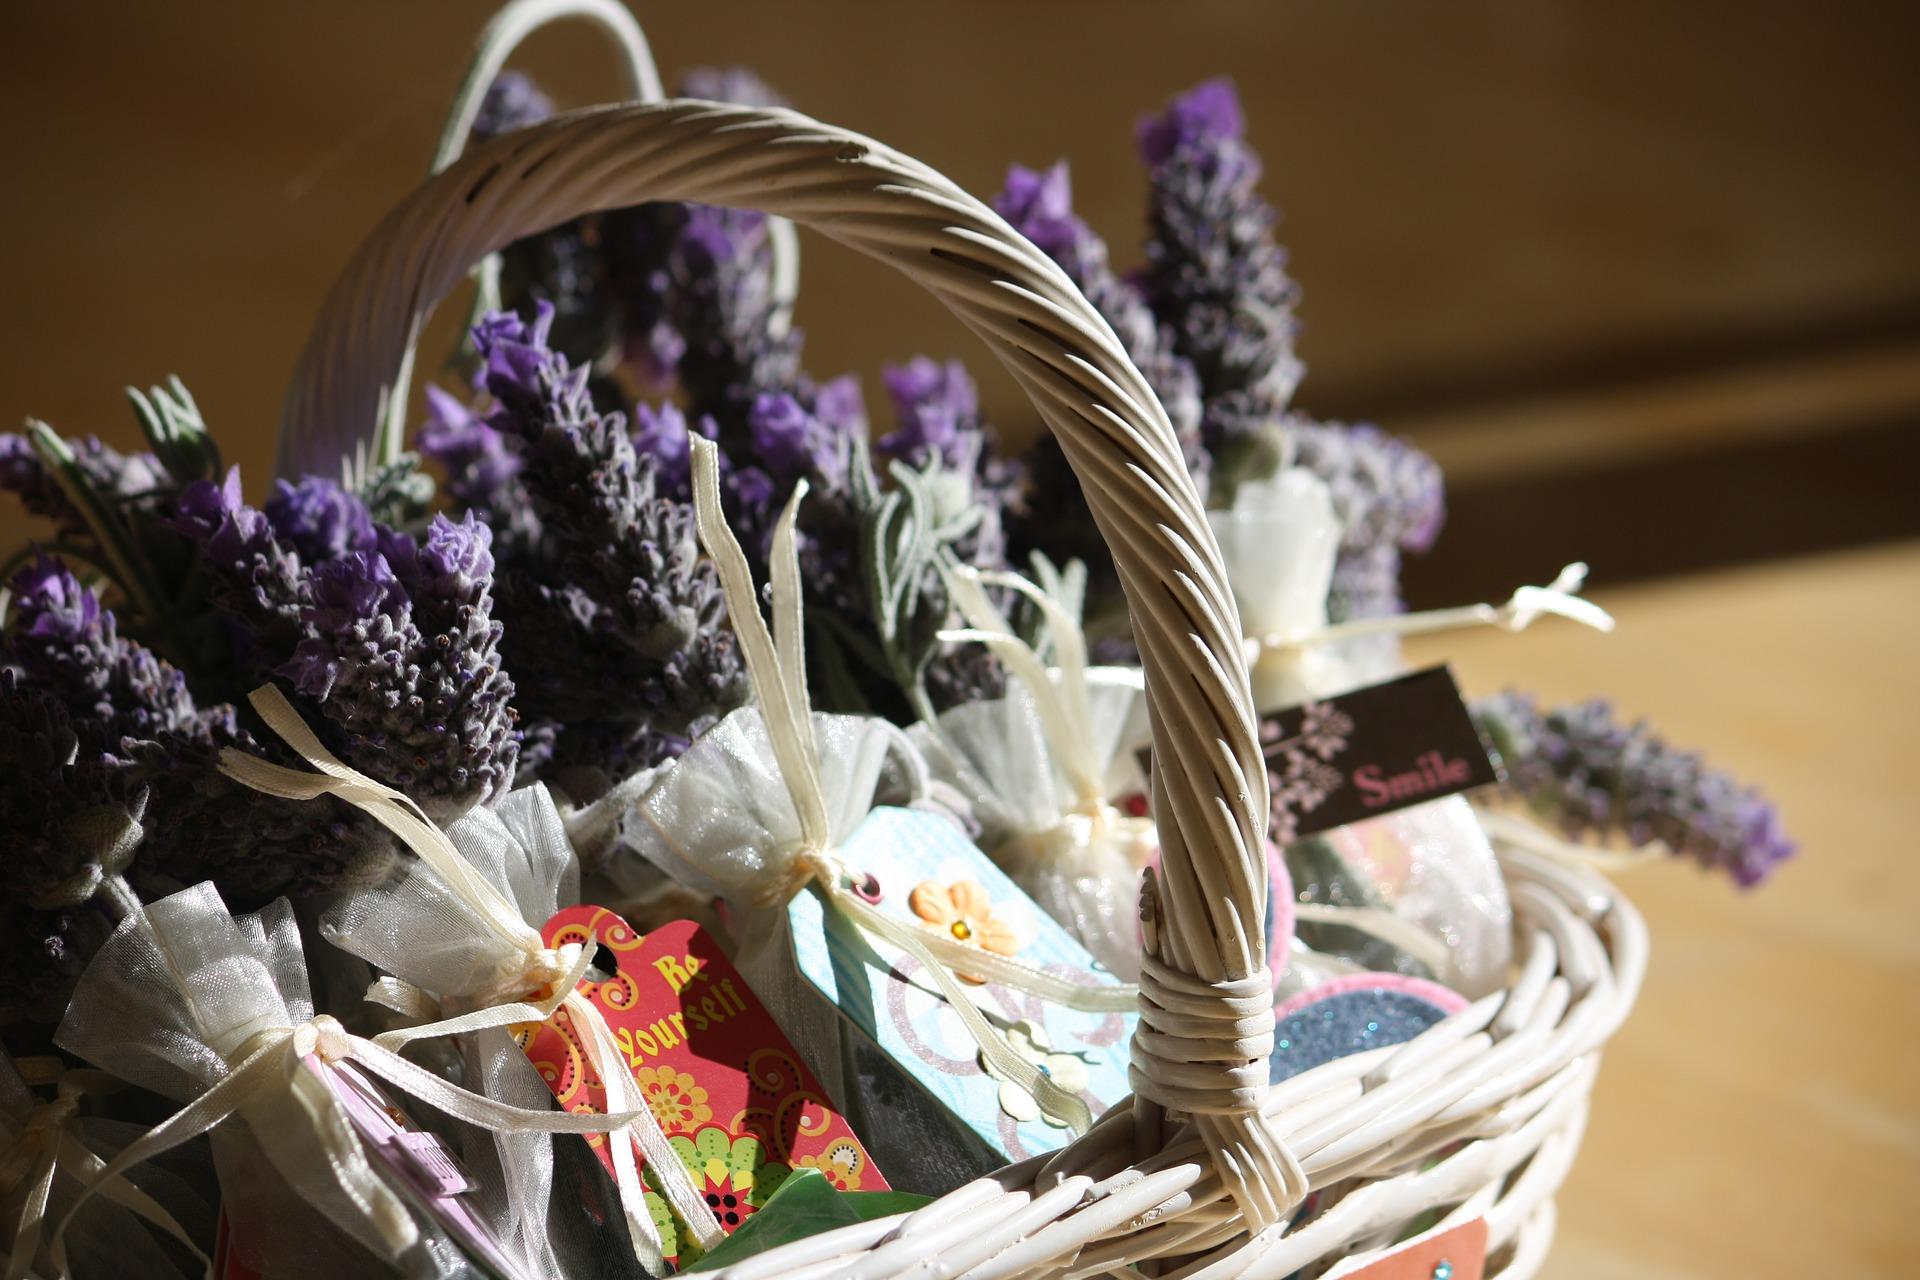 Building Your Holiday Gift Selections—Consider Gift Baskets